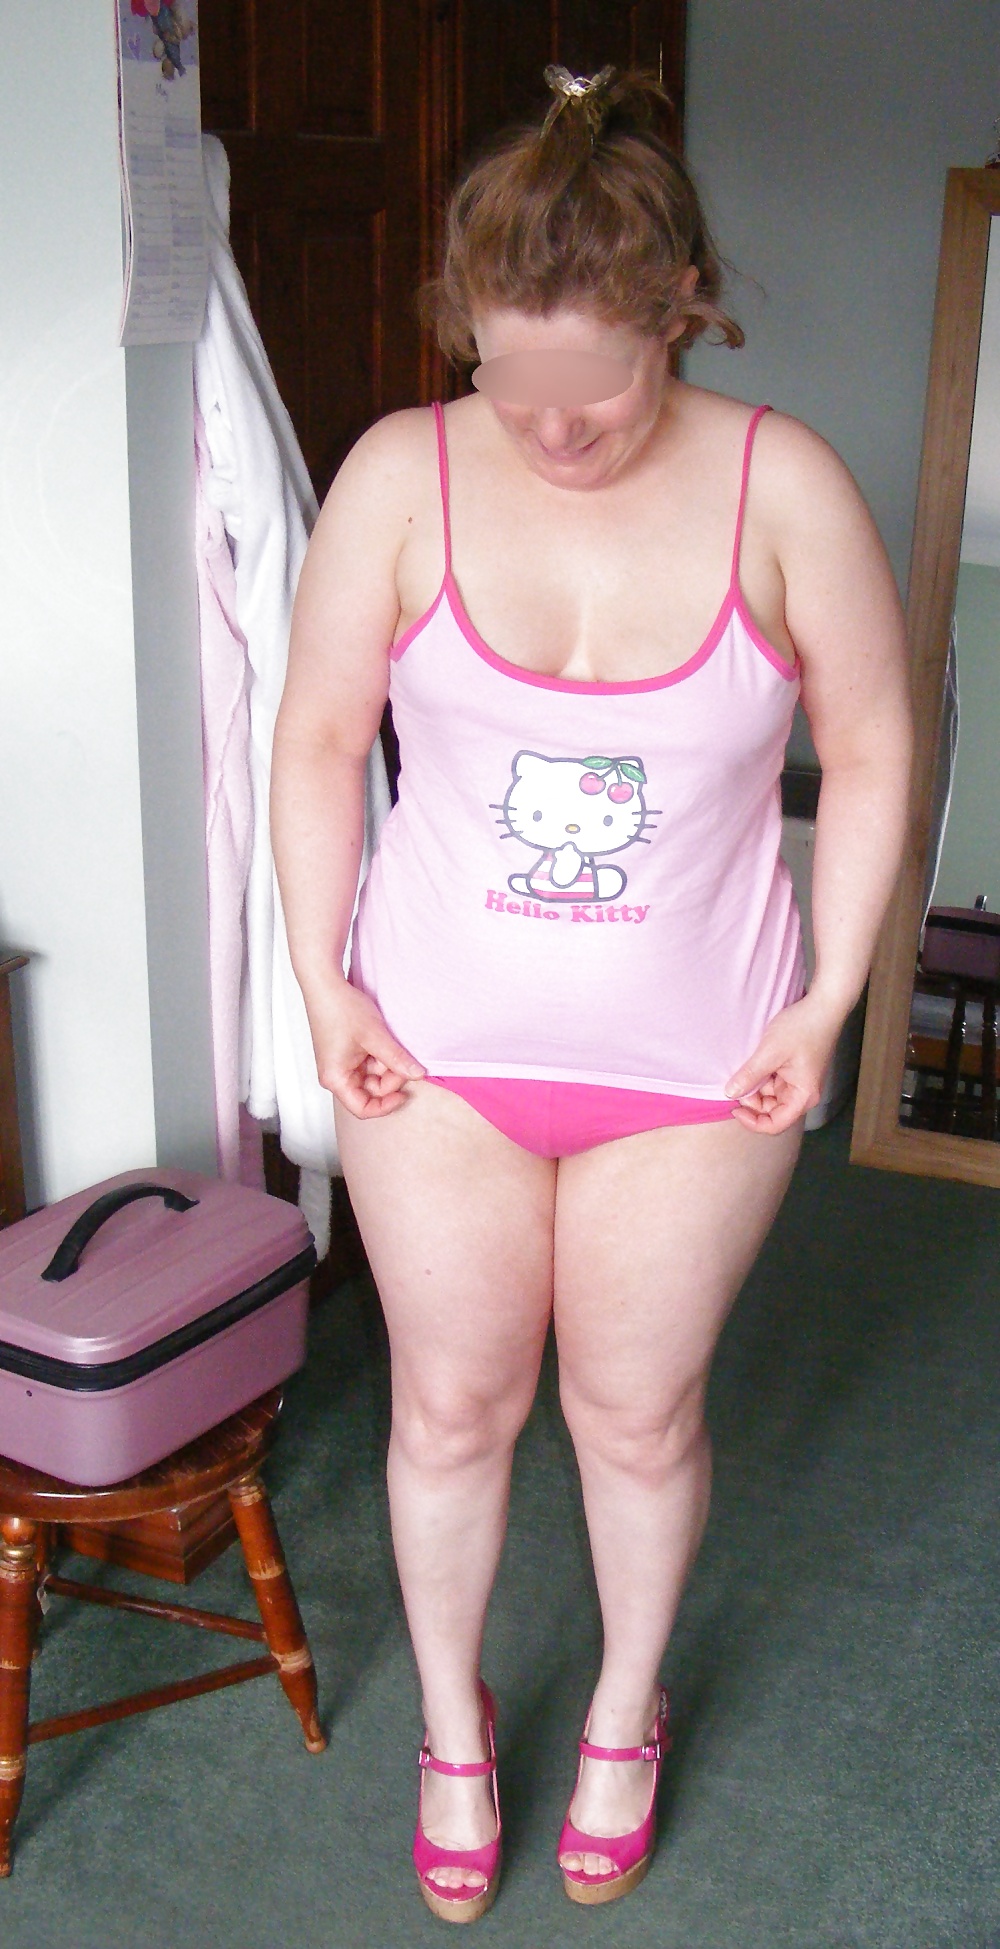 Slut in pink heels, in and out of Hello Kitty pyjamas adult photos